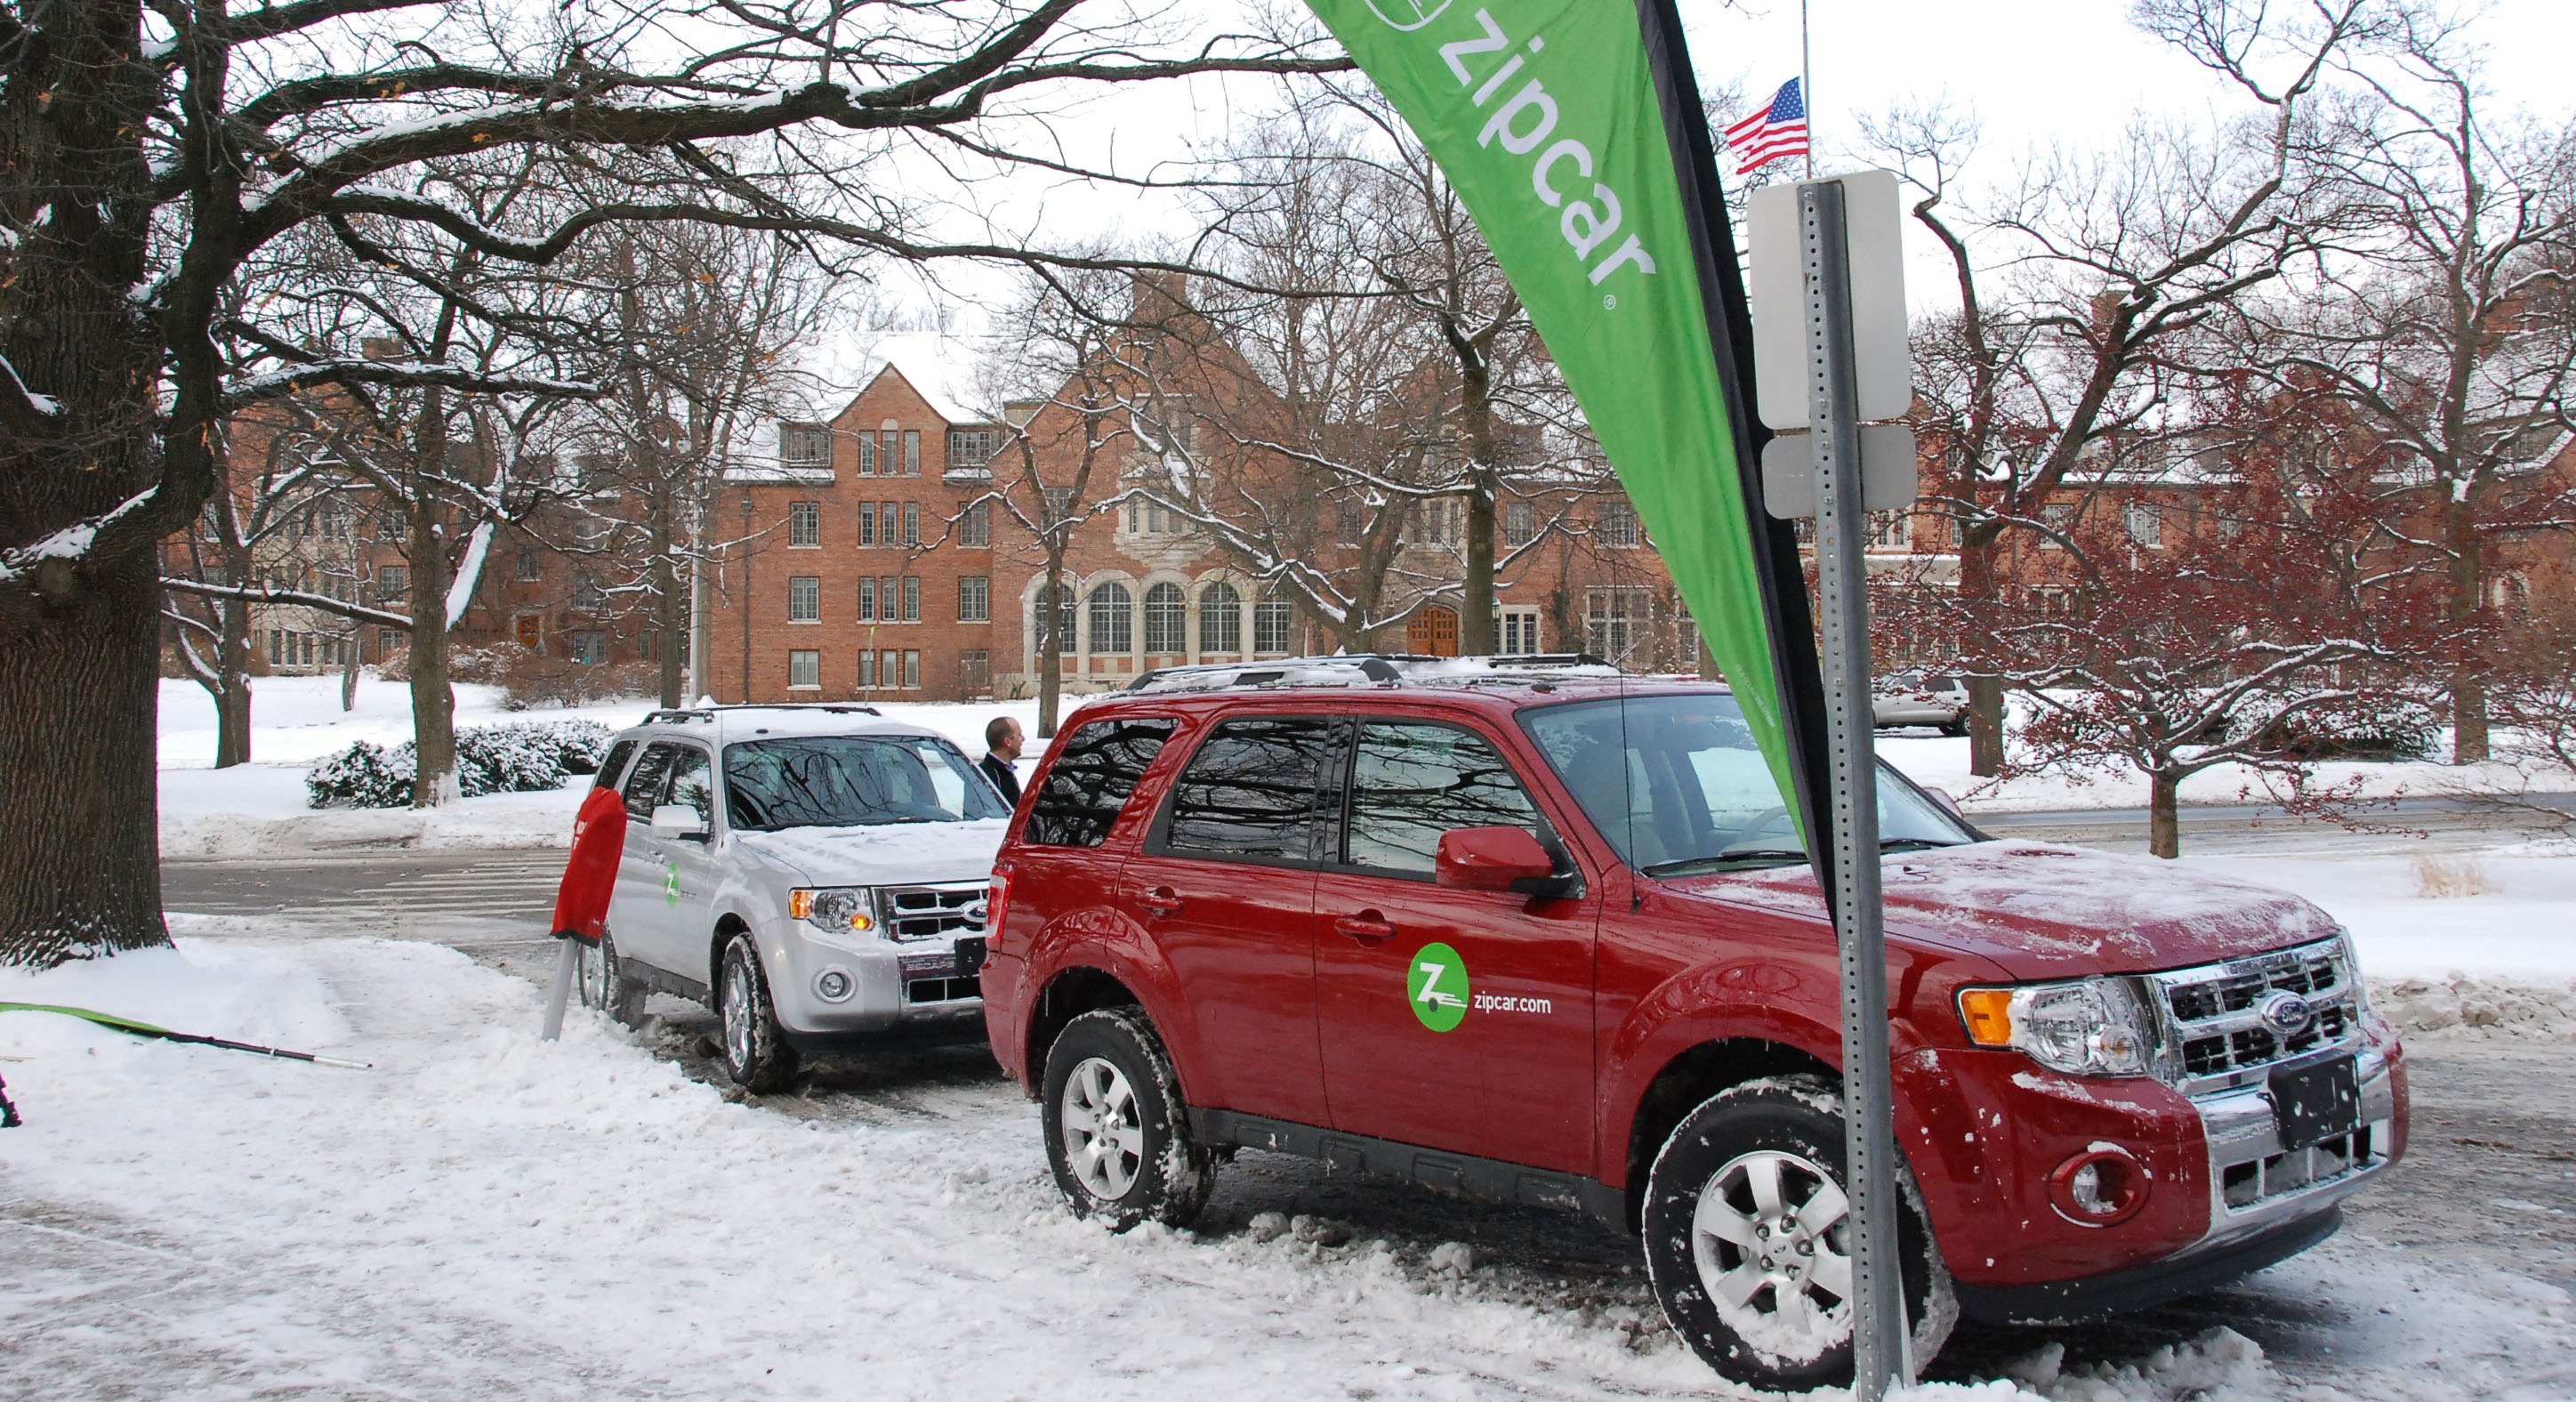 One white Ford Escape and one red Ford Escape are parked in front of the MSU Union by a Zipcar sign. Campus is snowy.